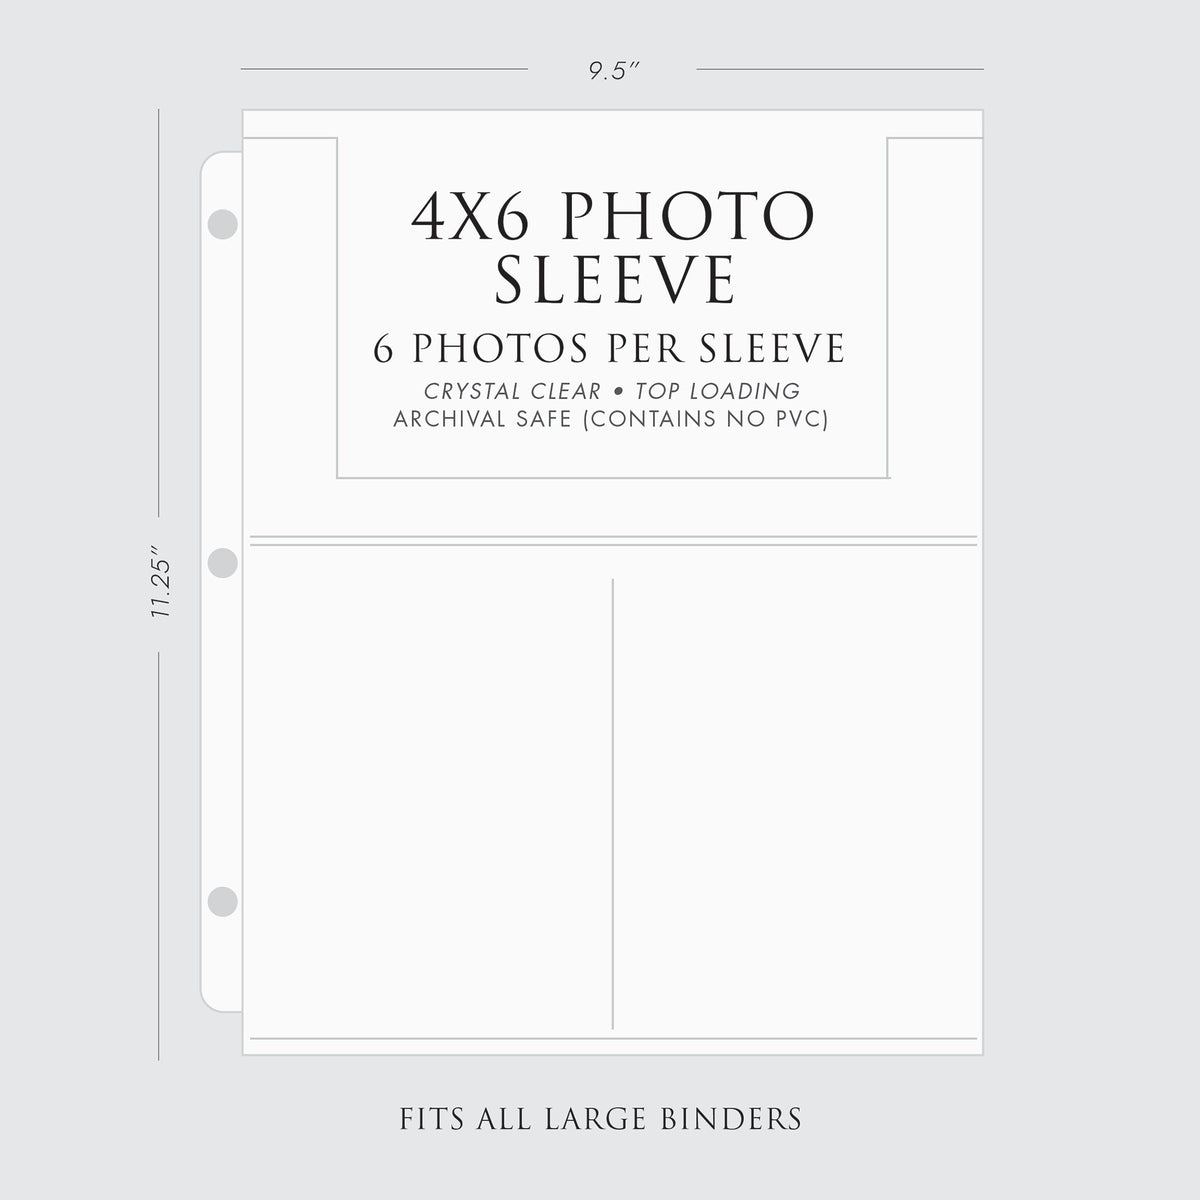 Large Photo Binder (for 4x6 photos) with White Vegan Leather Cover